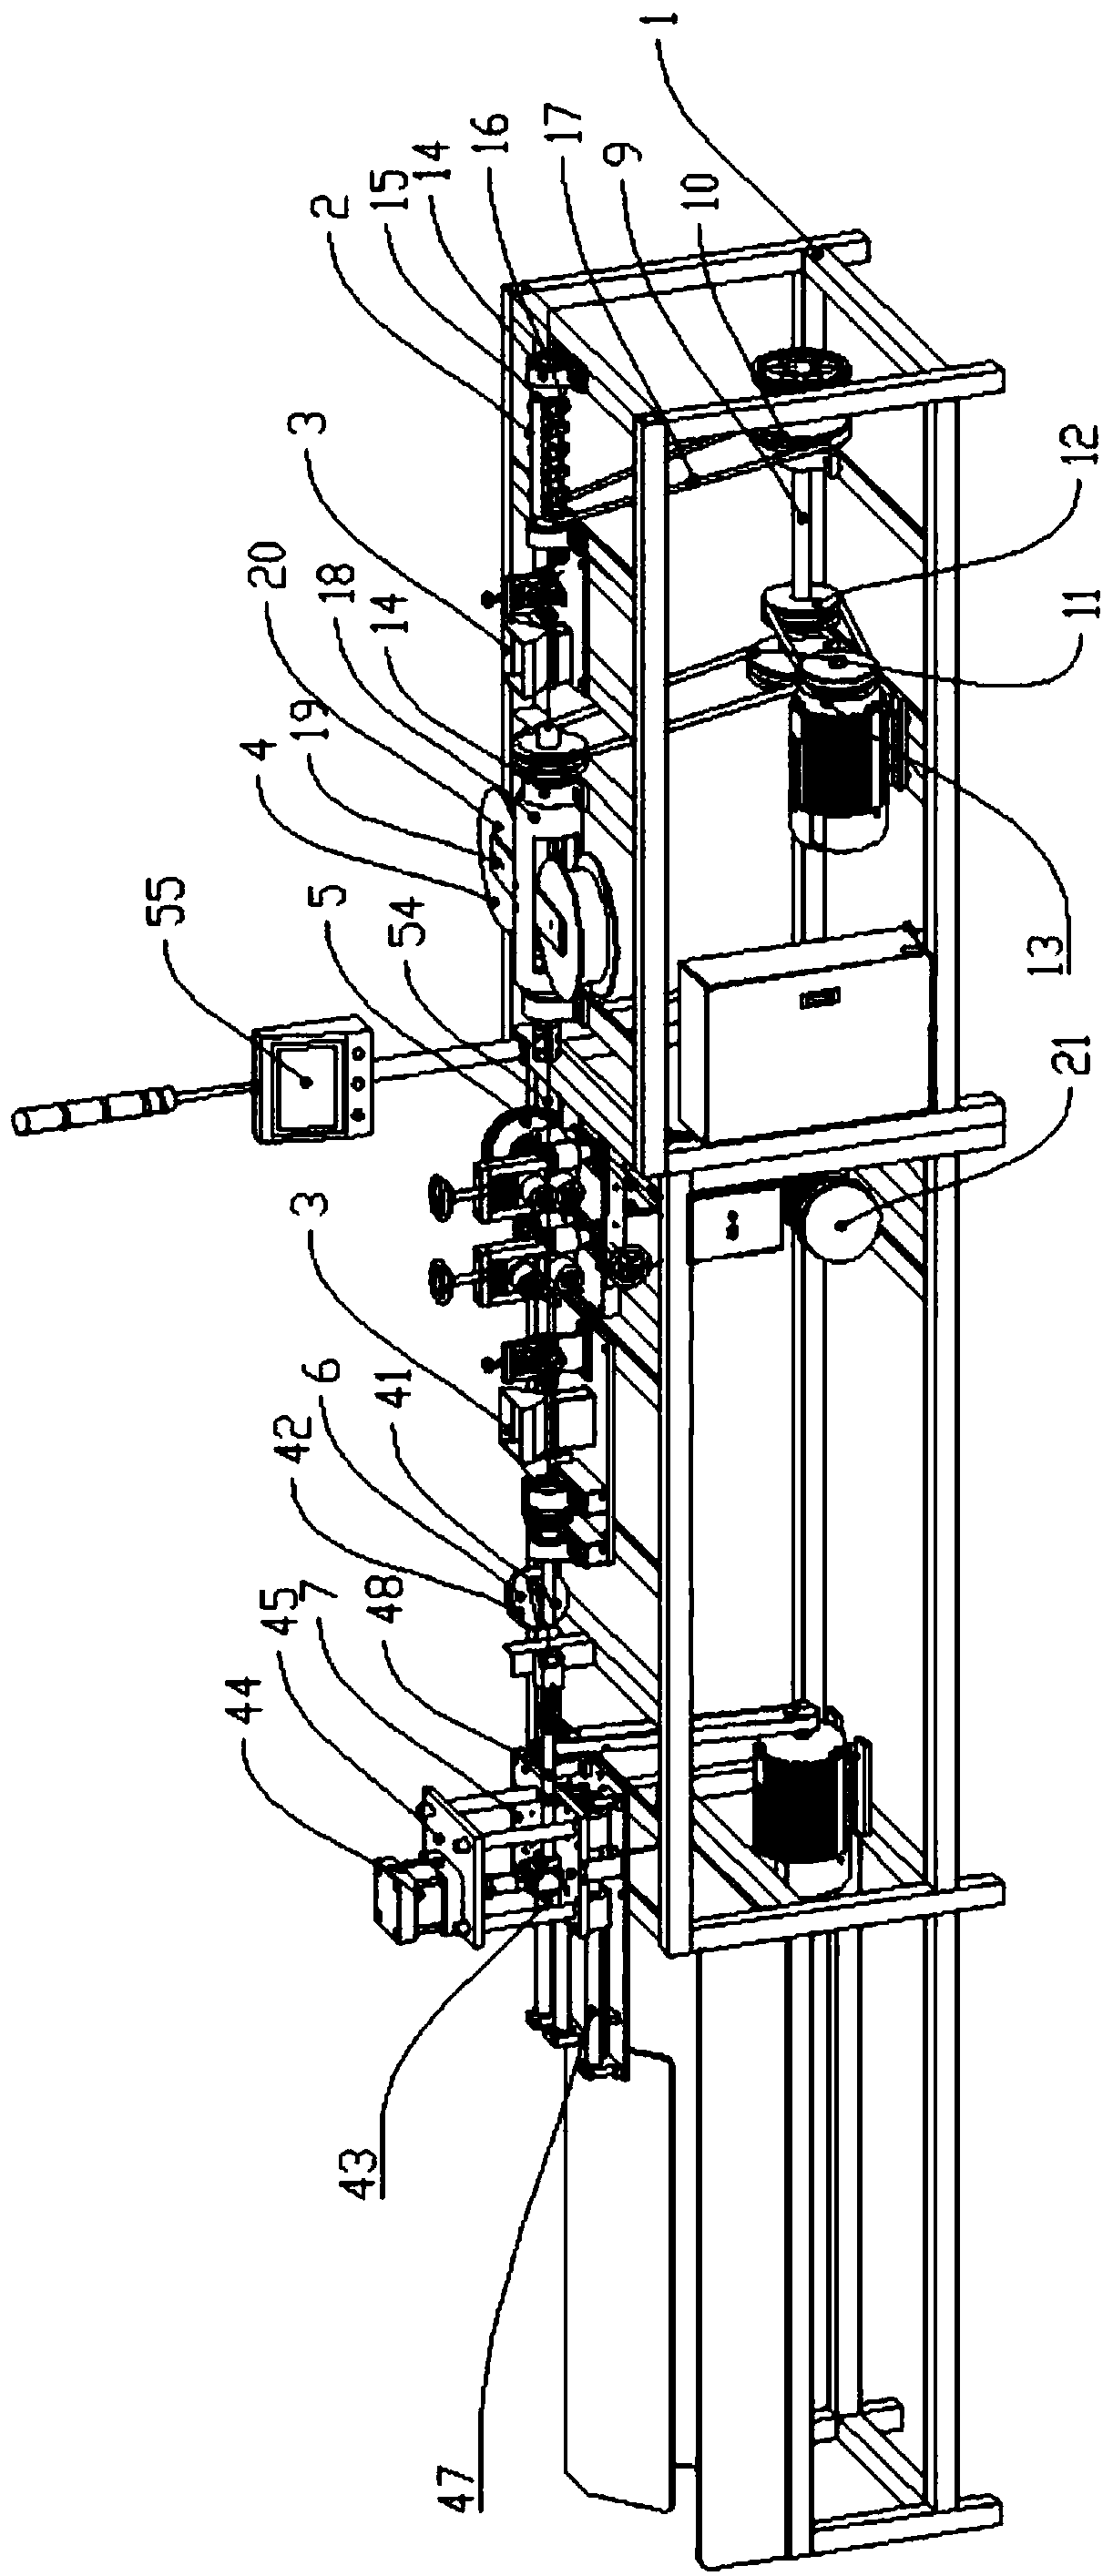 Iron wire winding and shearing device used during production of artificial flowers